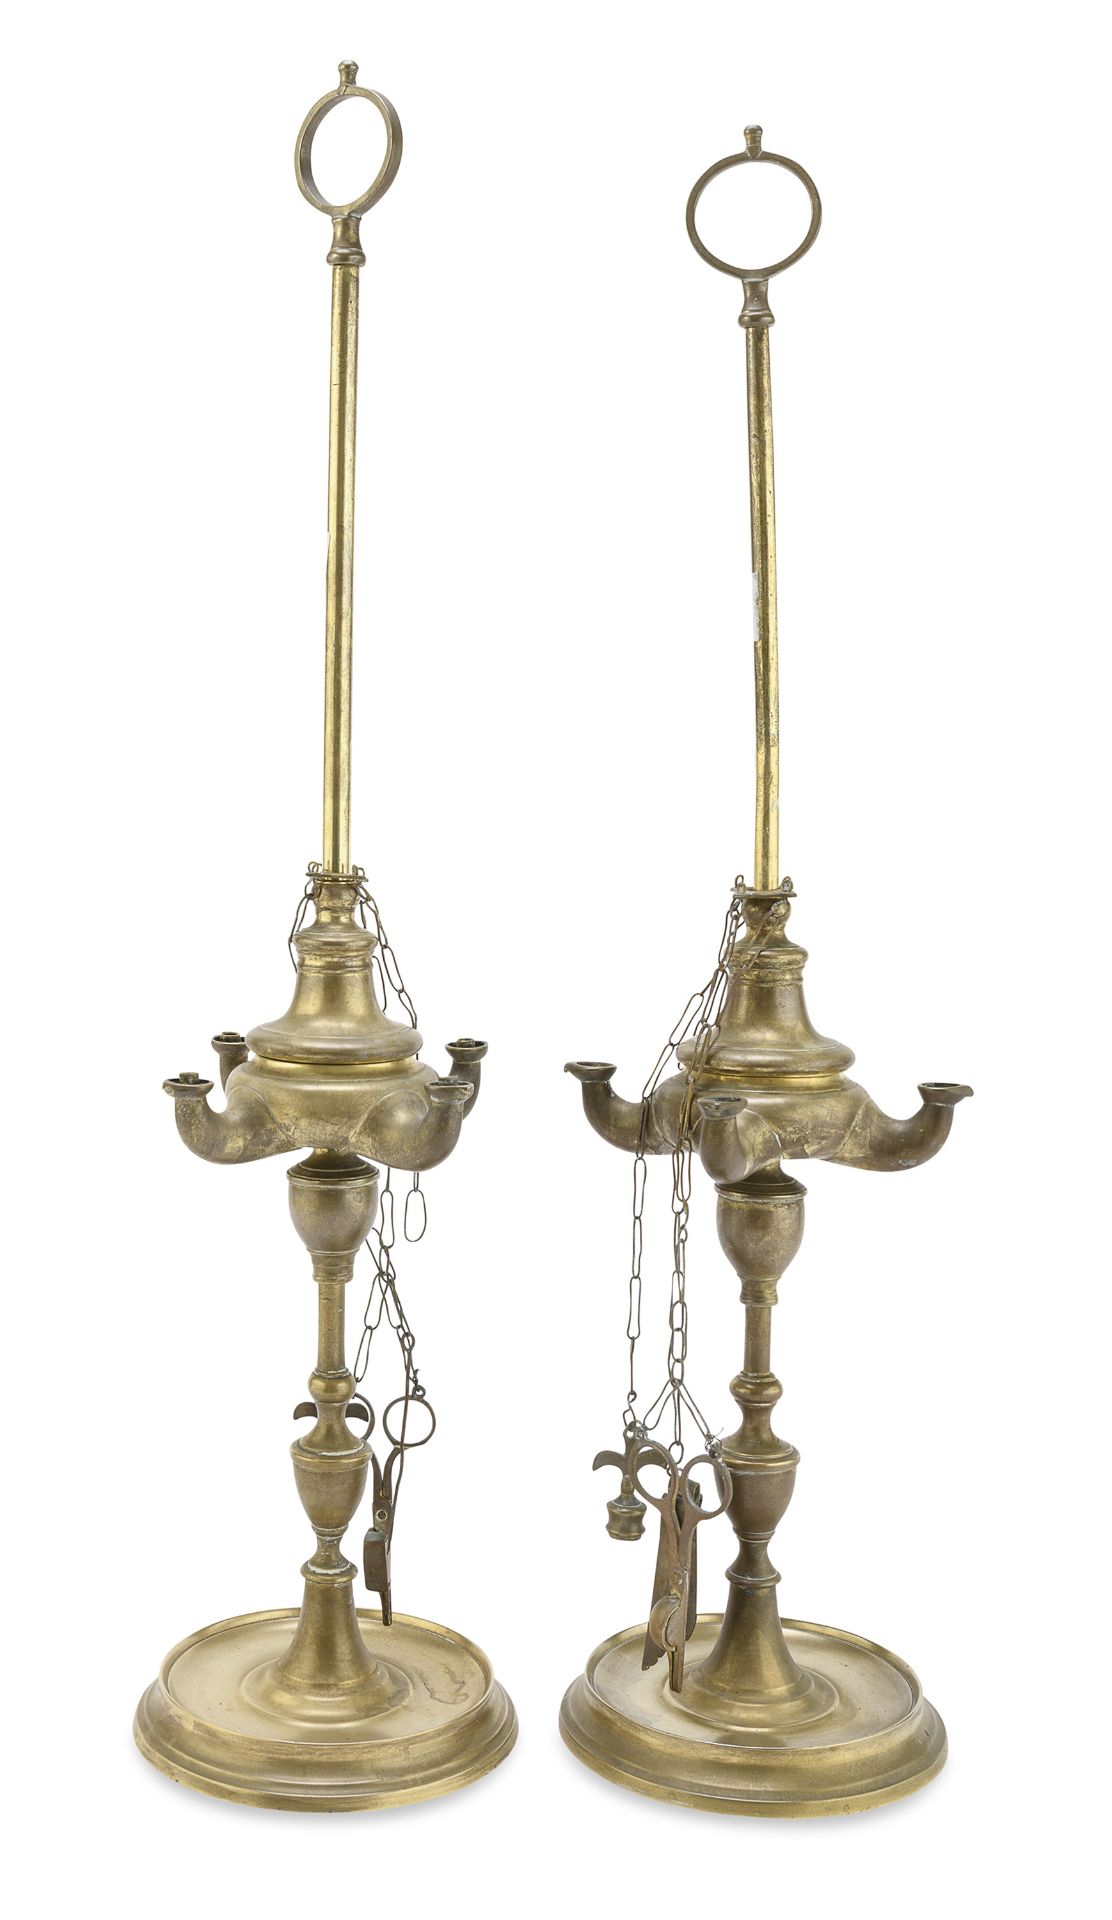 PAIR OF BRASS OIL LAMPS 19th CENTURY